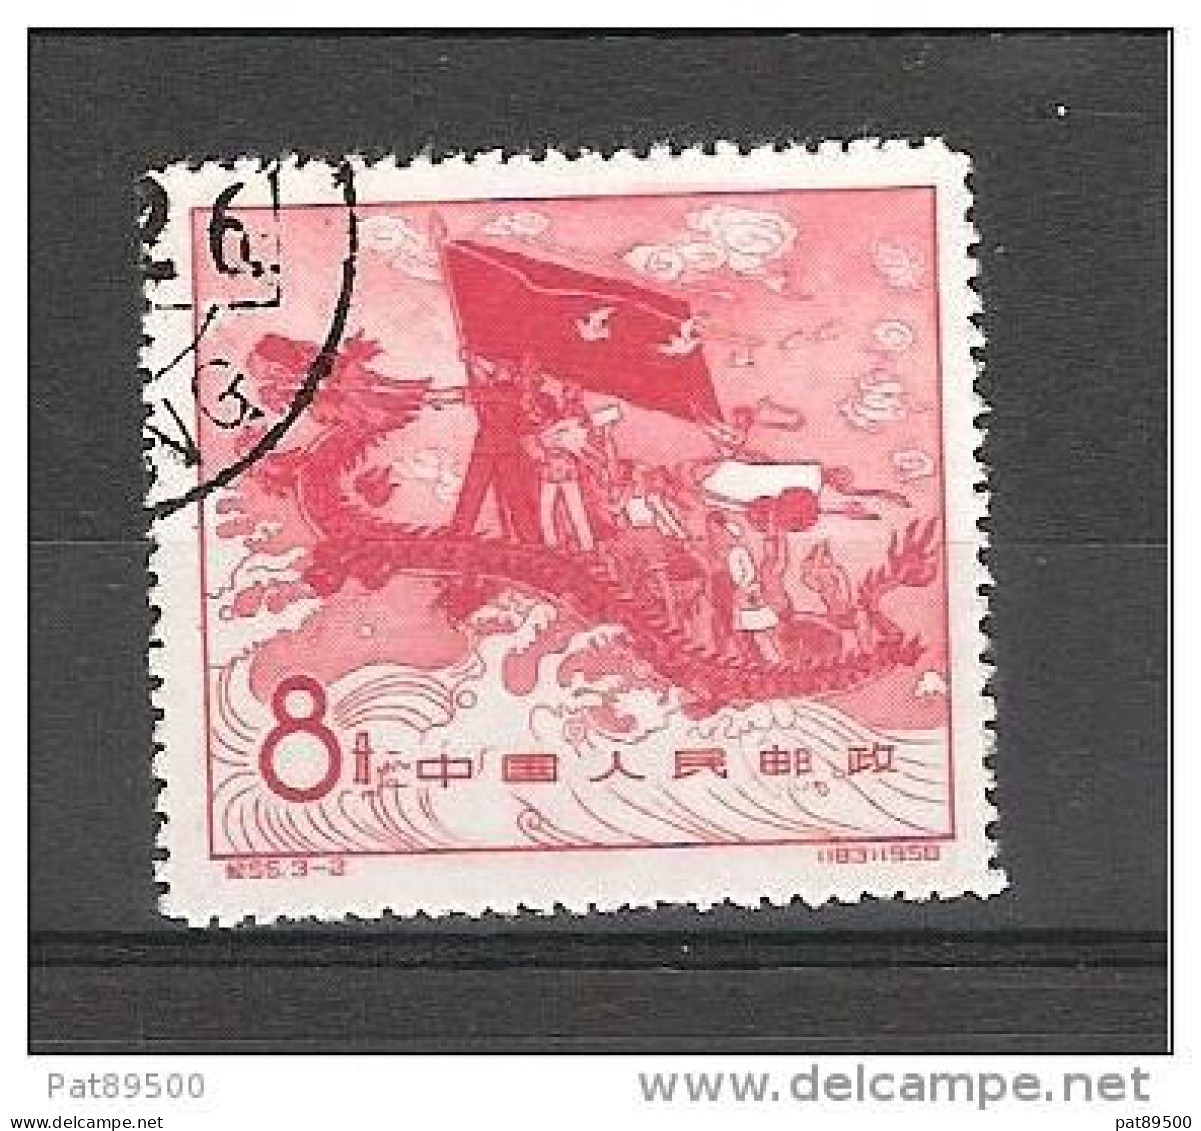 CHINE 1958 // YT 1161 O   // Cote 2006 = 0.50 Euro - Used Stamps